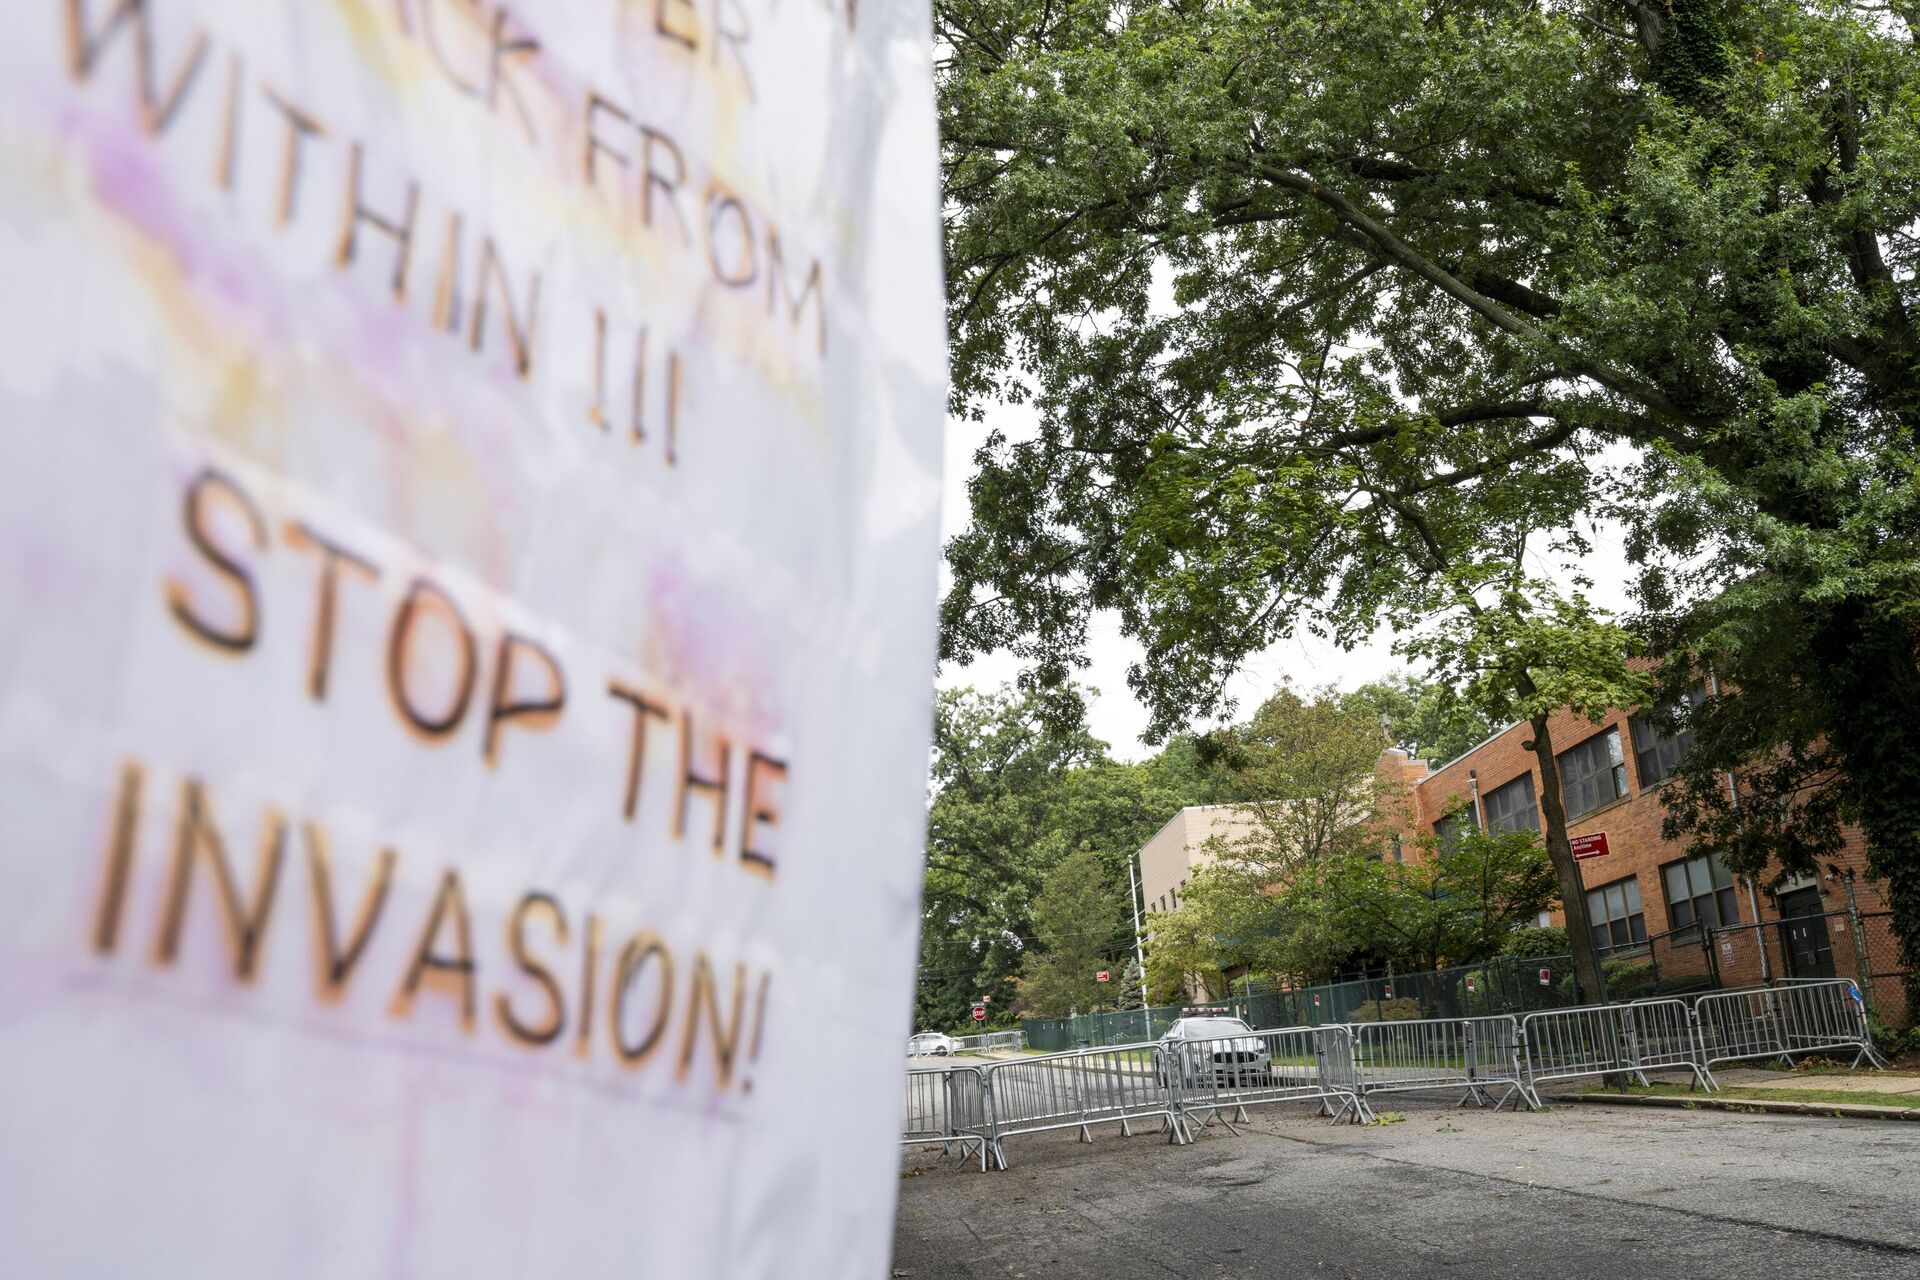 Protest signs are posted outside the former Saint John Villa Academy being repurposed as a shelter for homeless migrants, Wednesday, Sept. 13, 2023, in the Staten Island borough of New York. - Sputnik International, 1920, 27.09.2023